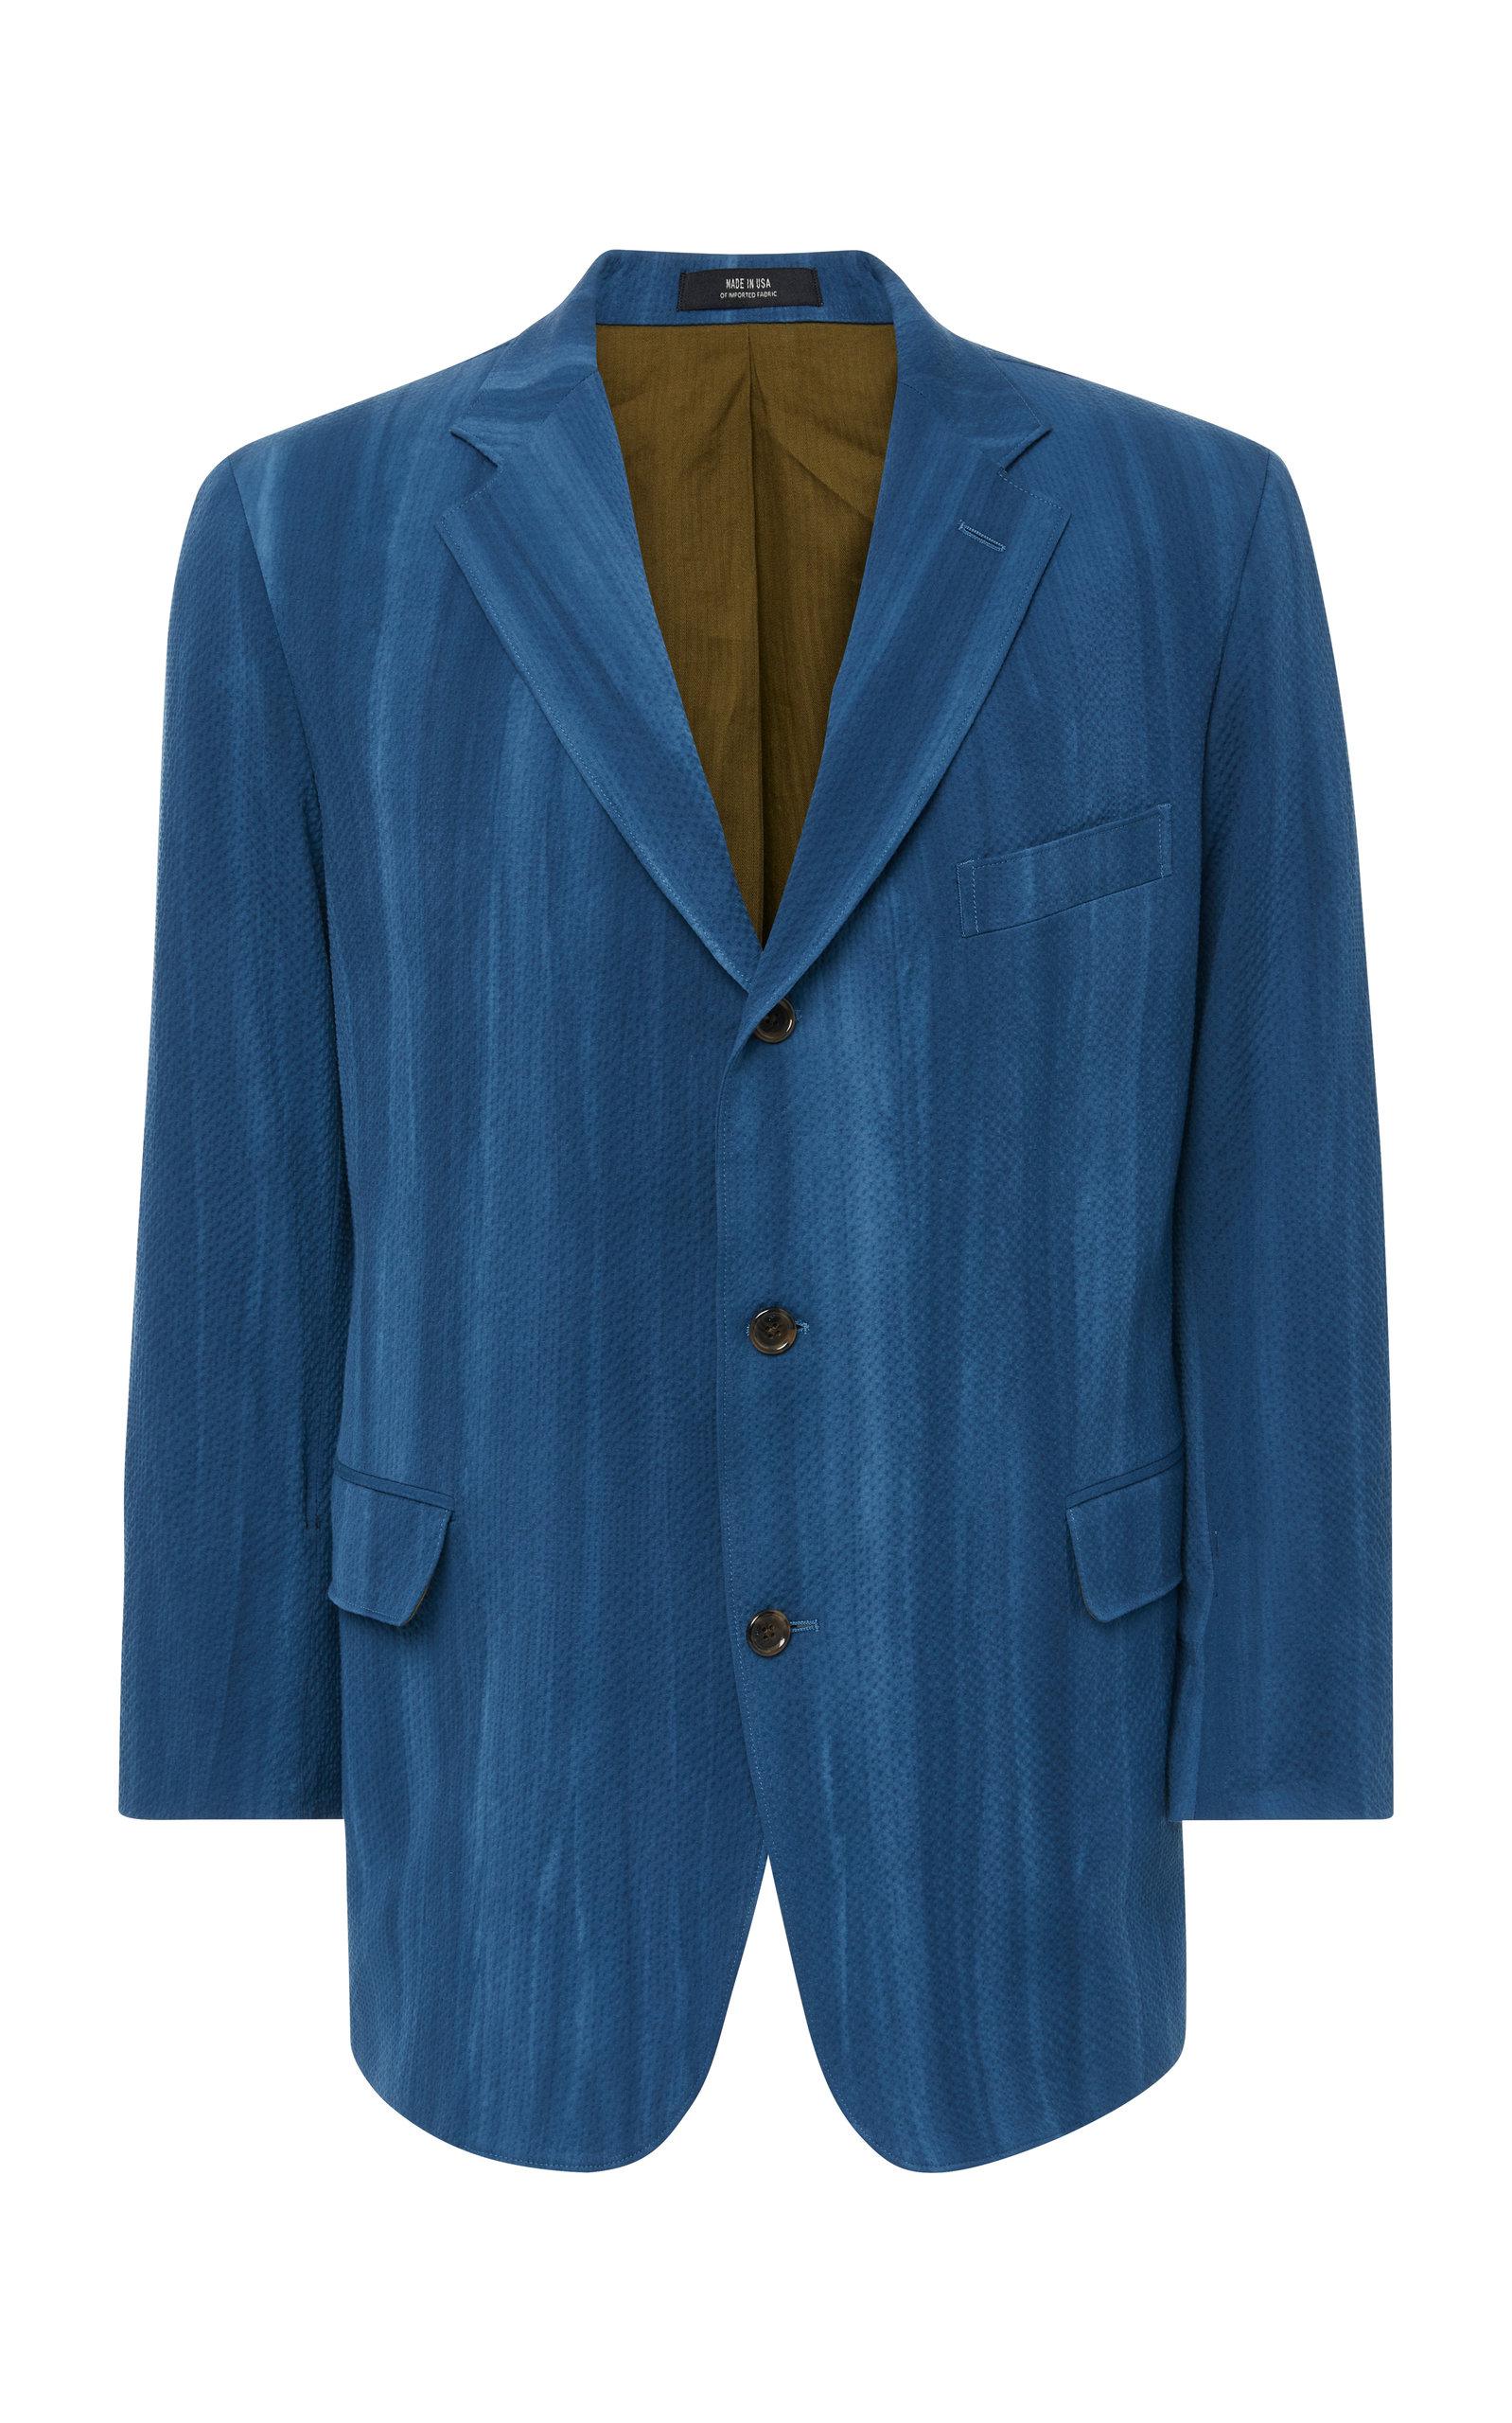 Todd Synder X Champion Tie Dye Suit Jacket in Blue for Men - Lyst